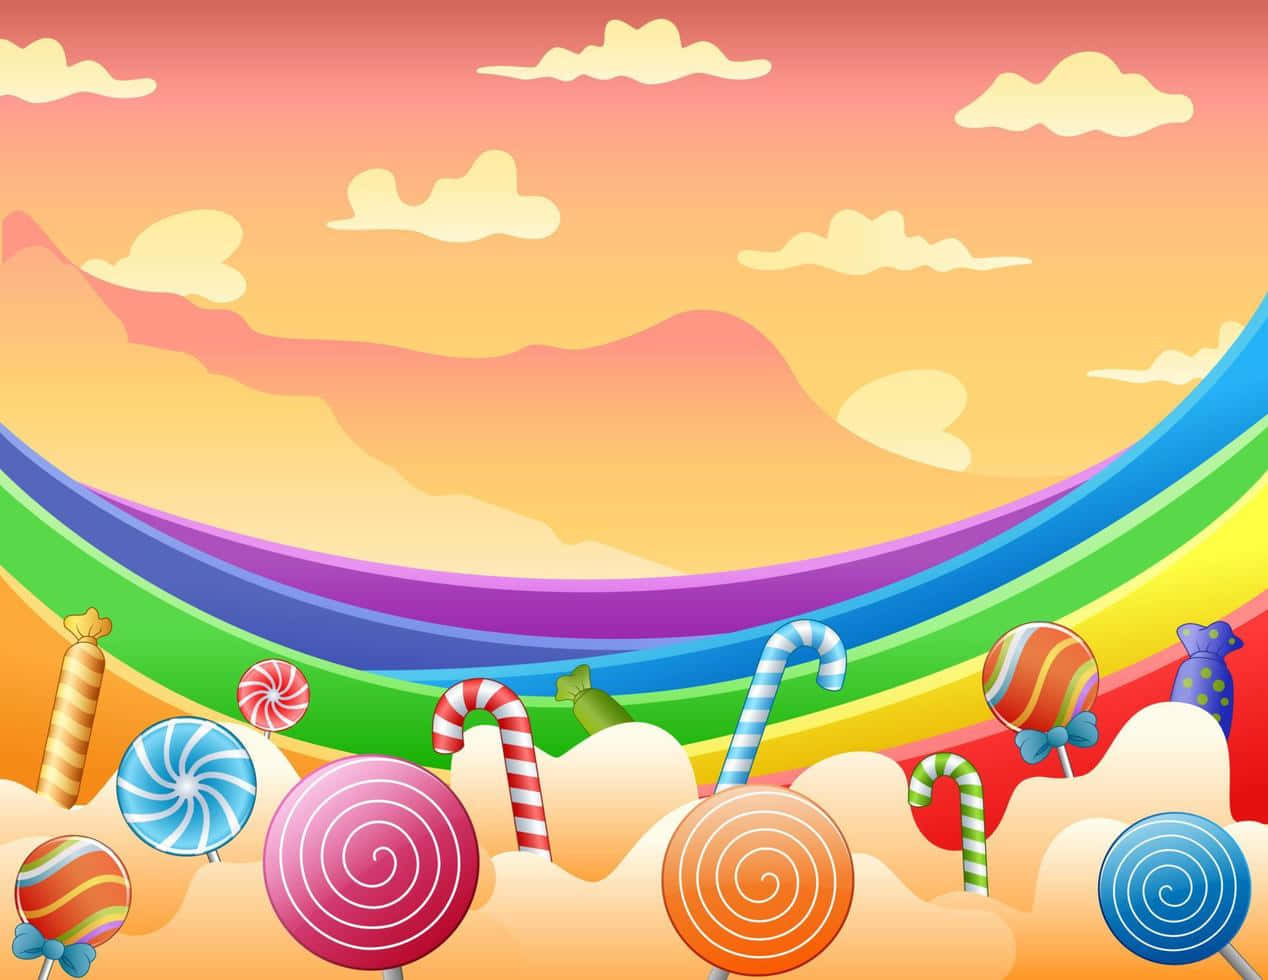 Indulge in a sweet journey through Candy Land Wallpaper